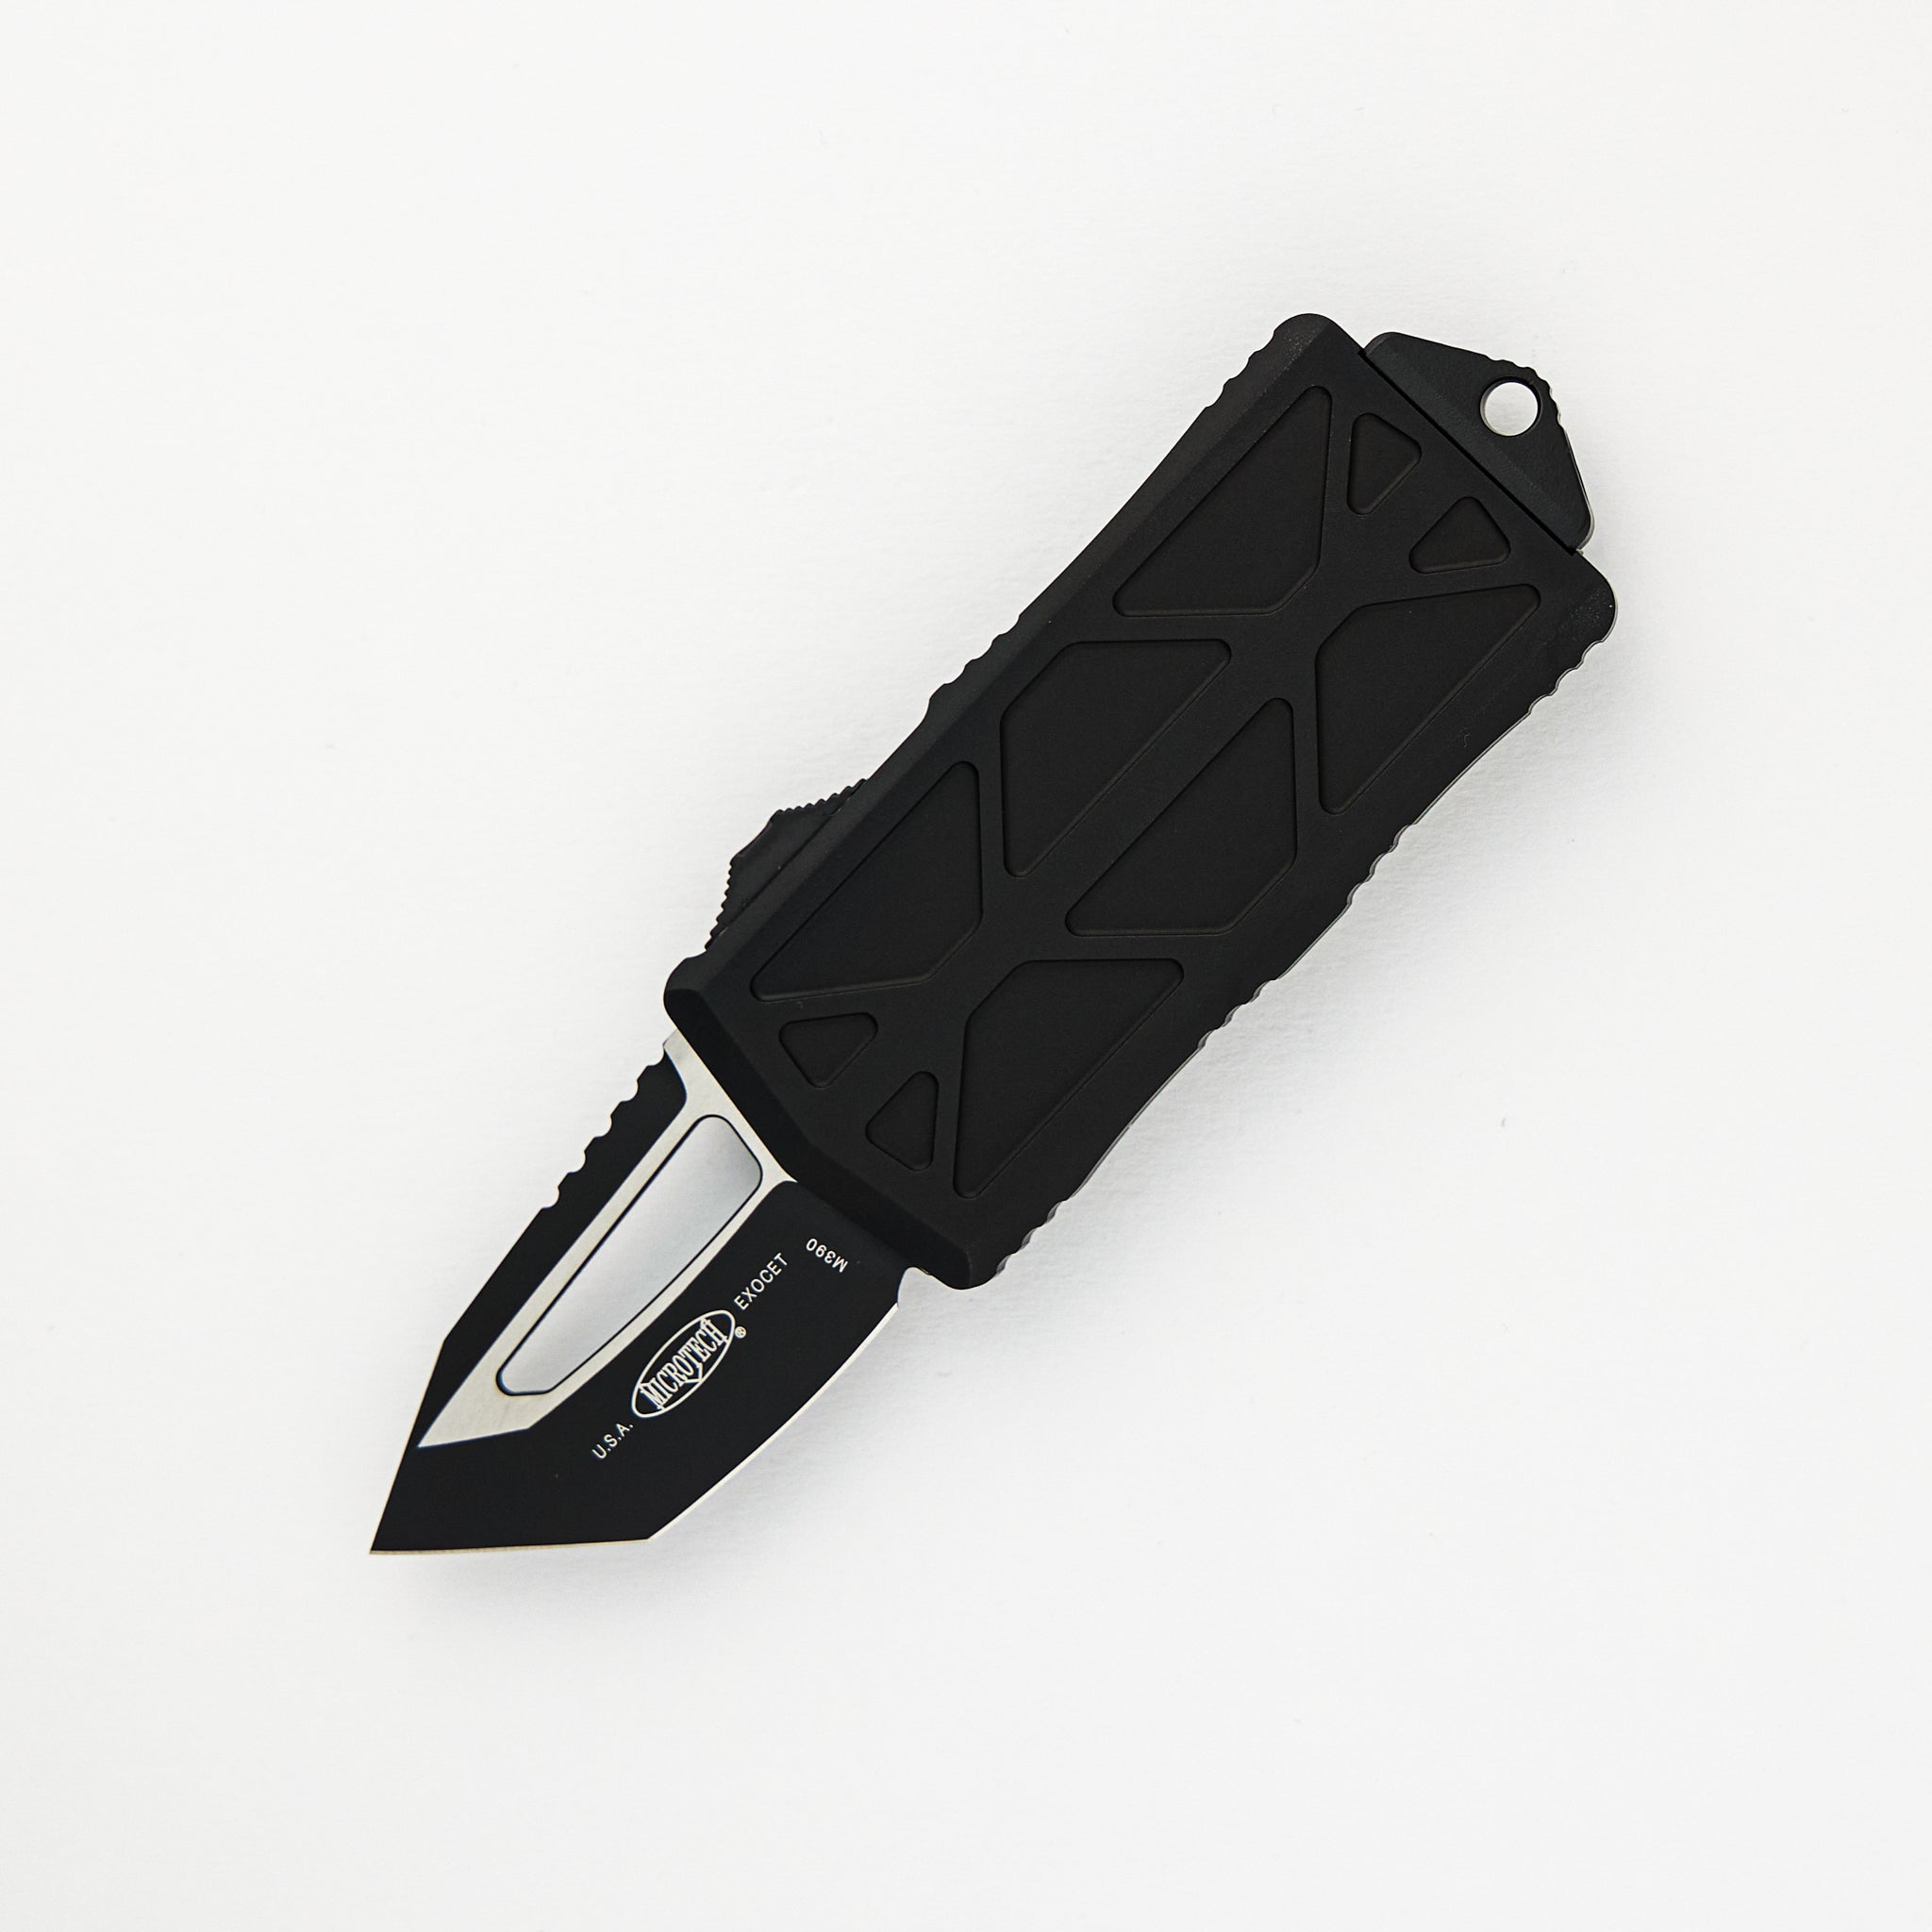 Microtech Exocet T/E Tactical Standard 158-1 T